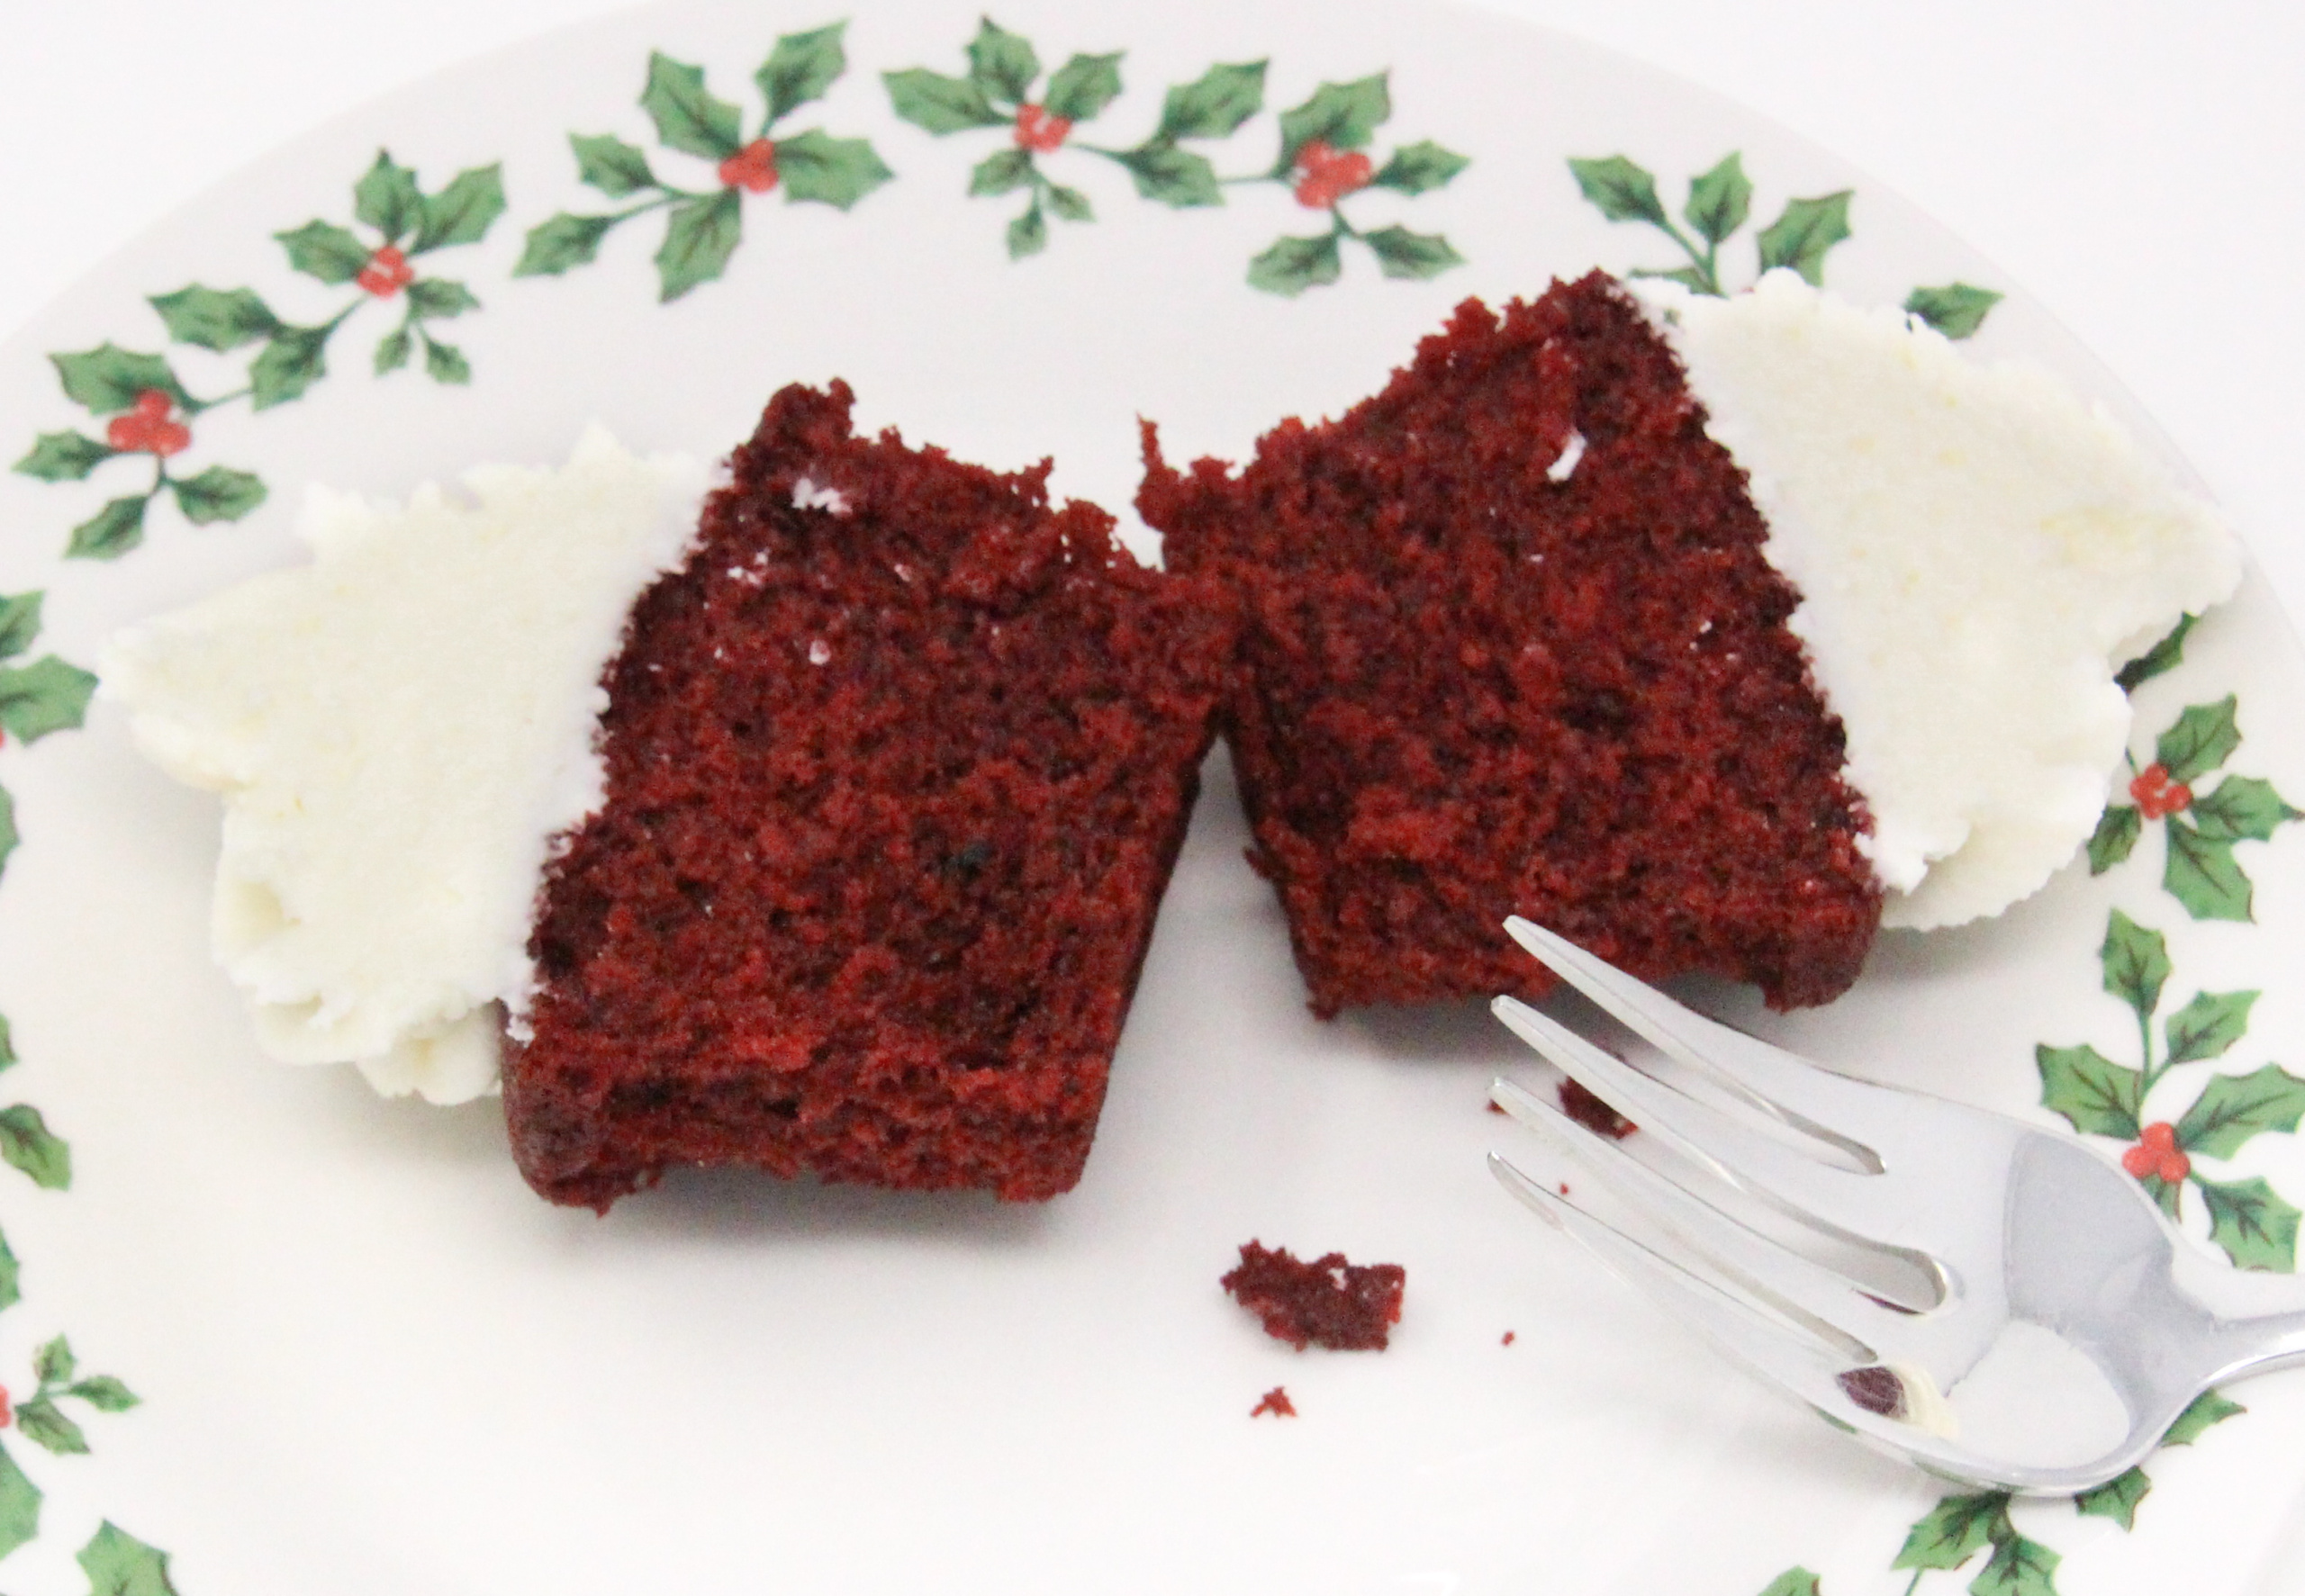 These red velvet cupcakes contain the perfect amount of chocolate and when topped with mounds of sweet buttercream frosting, the results are pure yumminess, making them a delicious way to celebrate the holidays! Recipe shared with permission granted by Christina Romeril, author of A NUTCRACKER NIGHTMARE. 